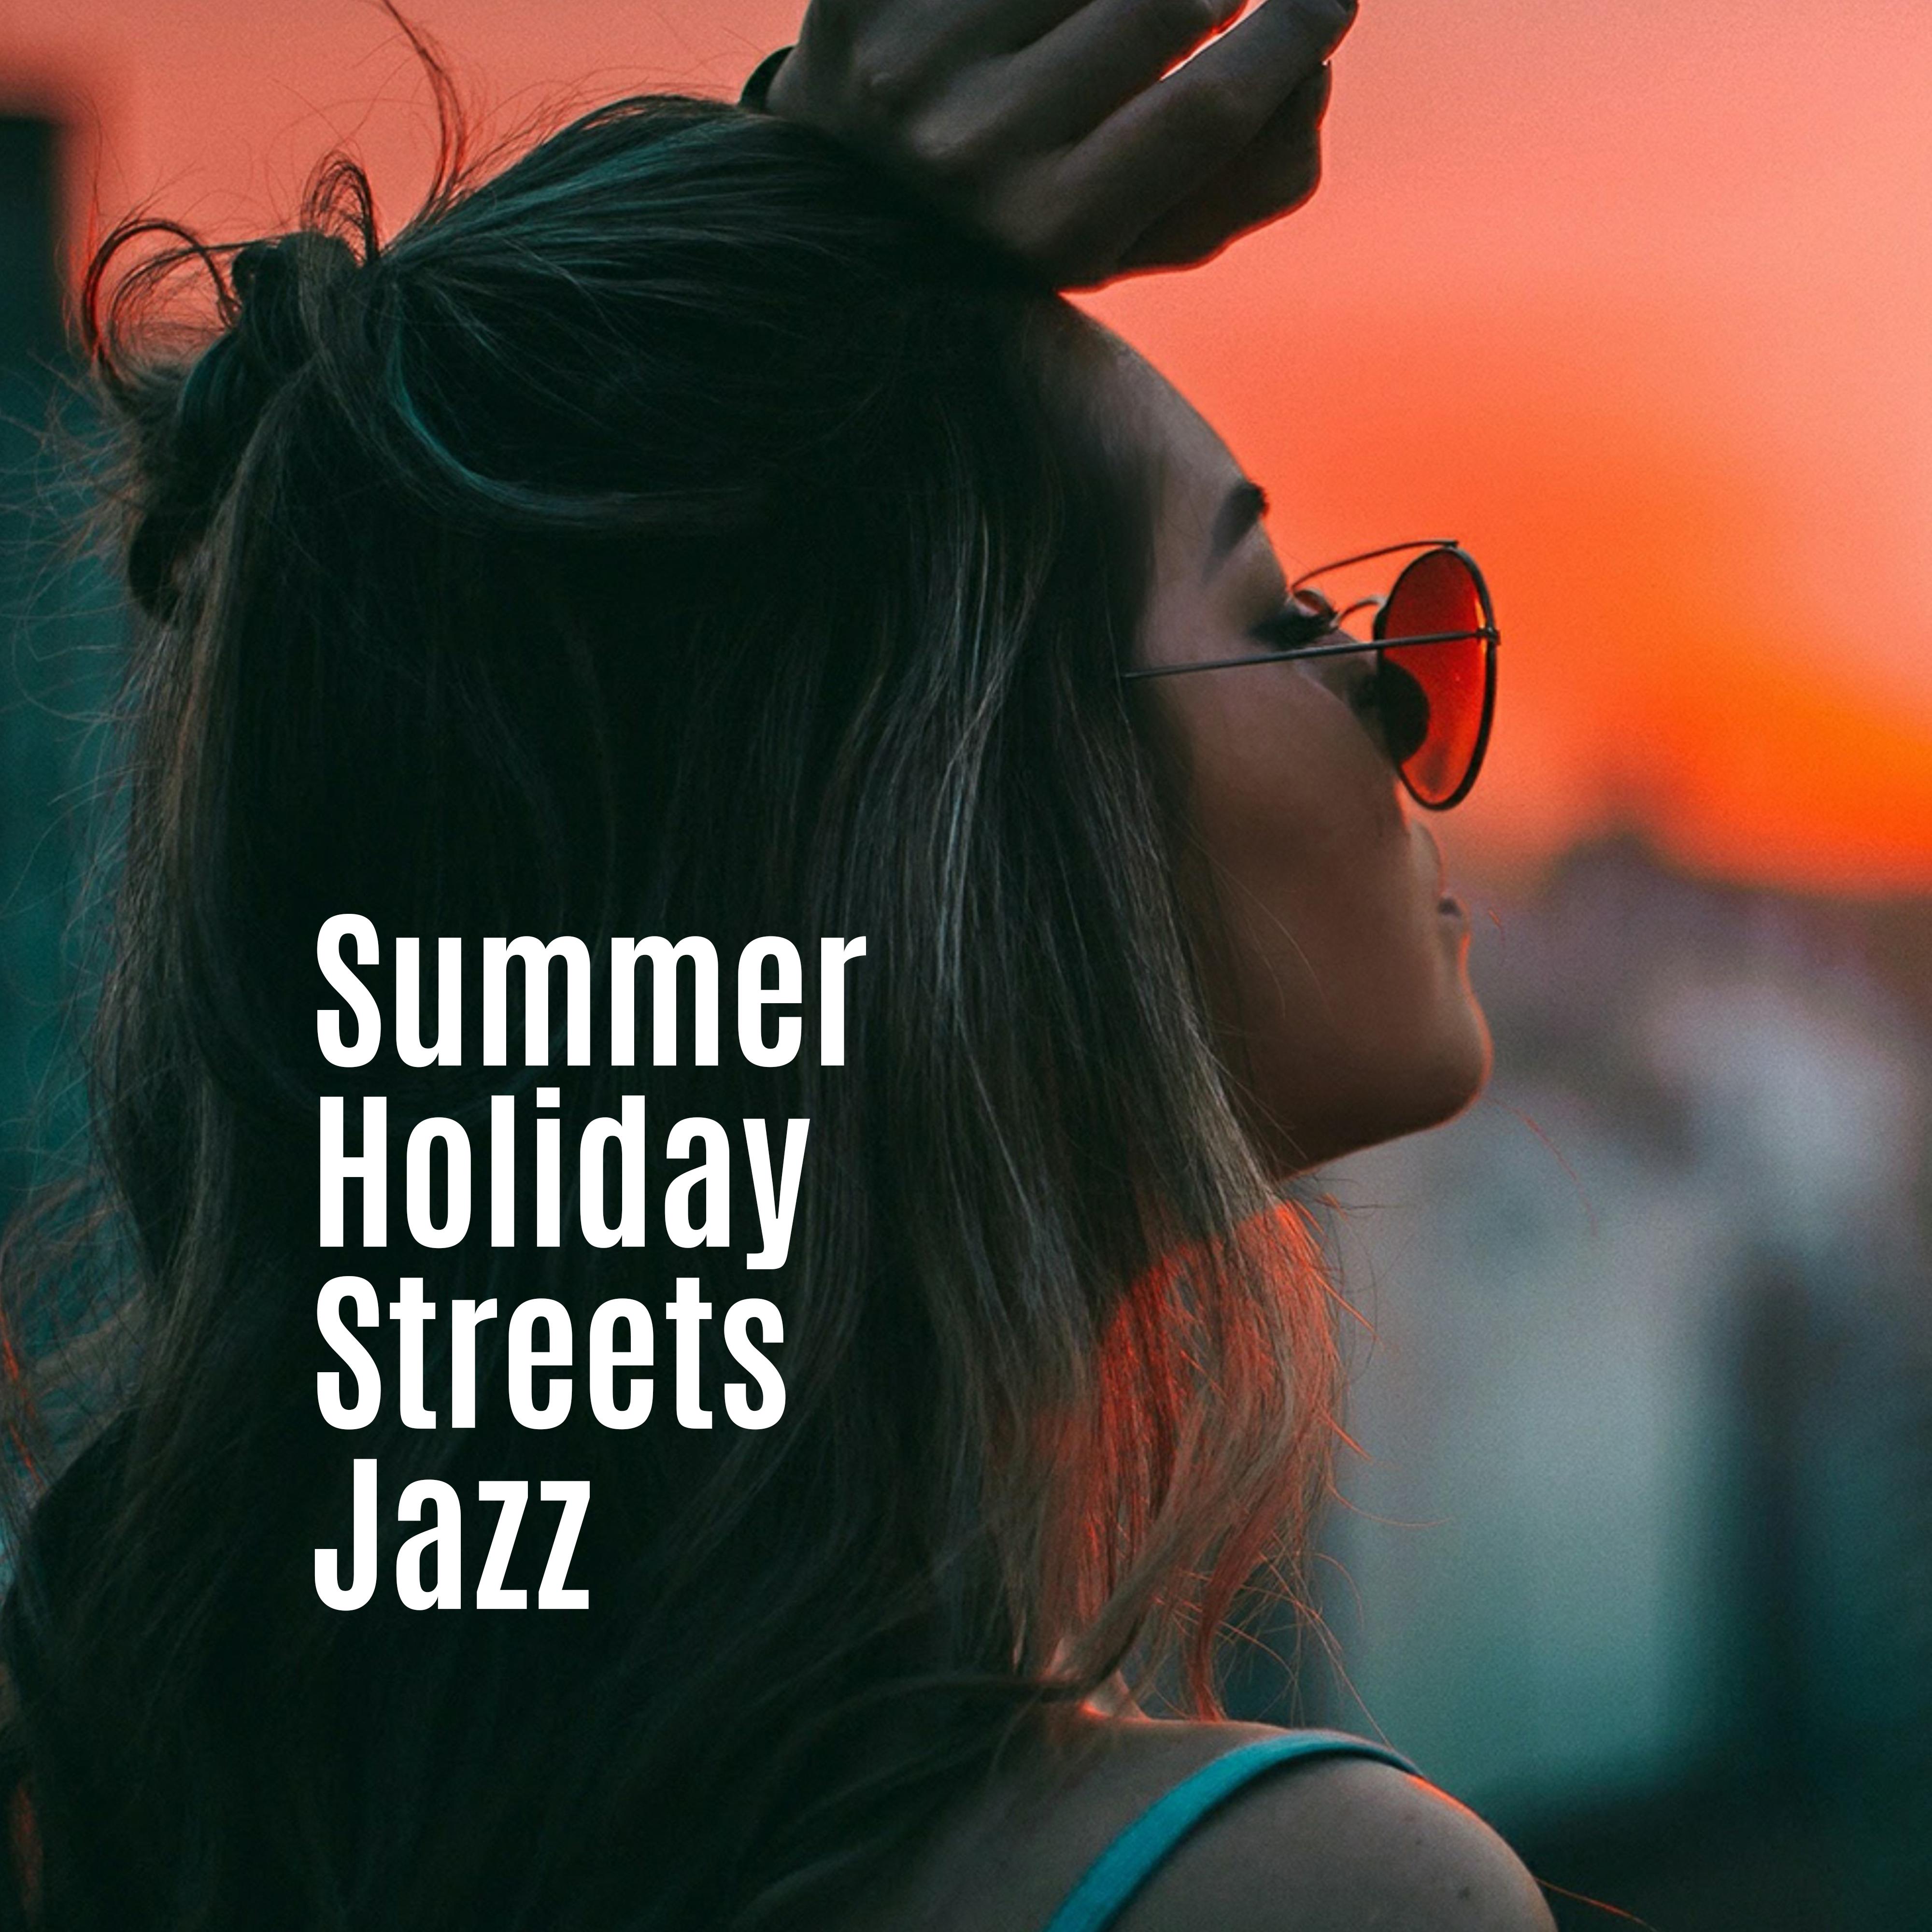 Summer Holiday Streets Jazz: 2019 Modern Smooth Jazz Music Collection for Summer Time Relaxation, Holidays in Warm Countries, Vacation Celebration with Happy Jazz